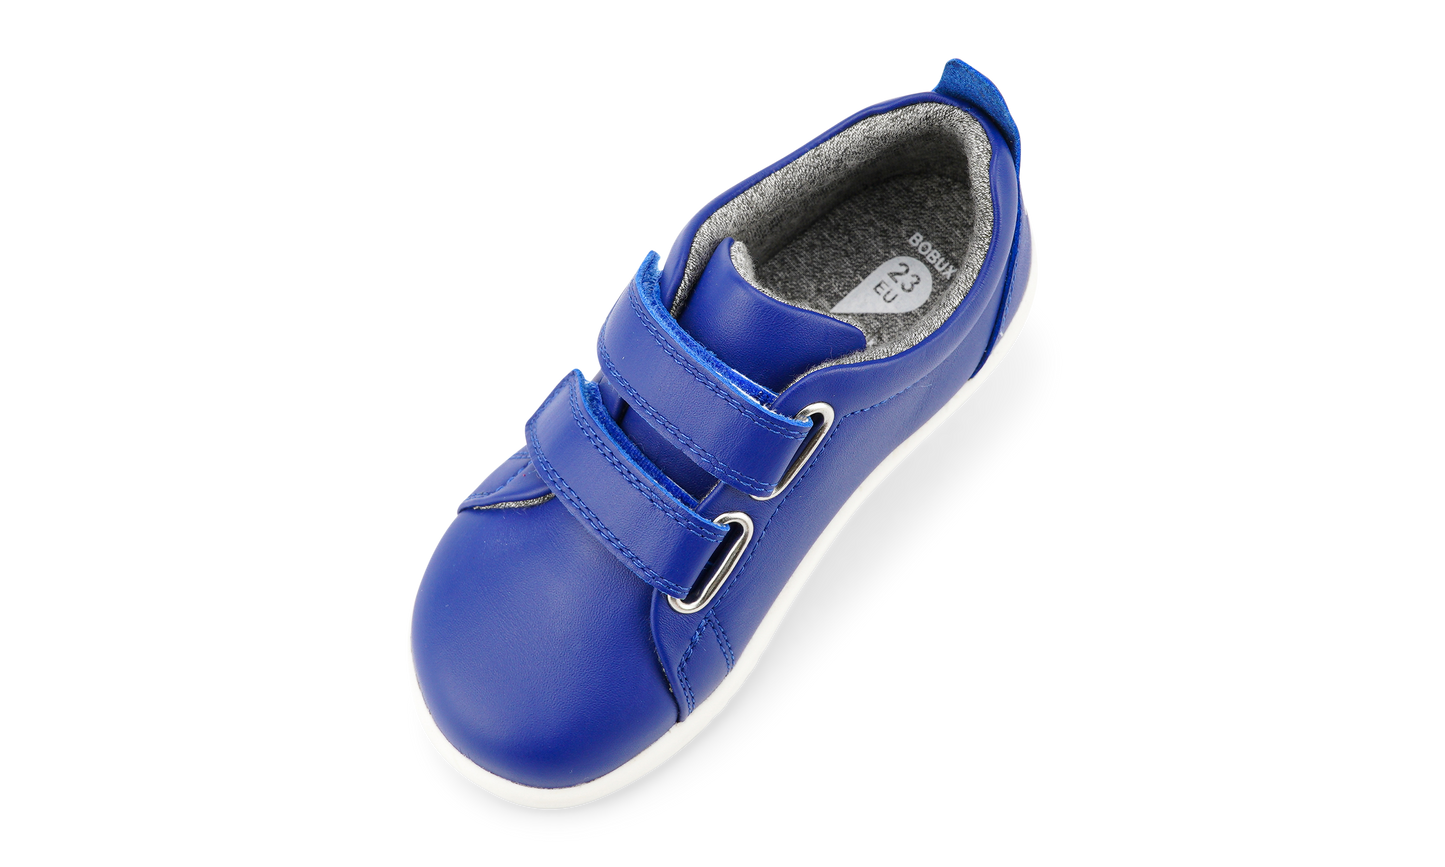 IW Grass Court Shoe in Blueberry Leather